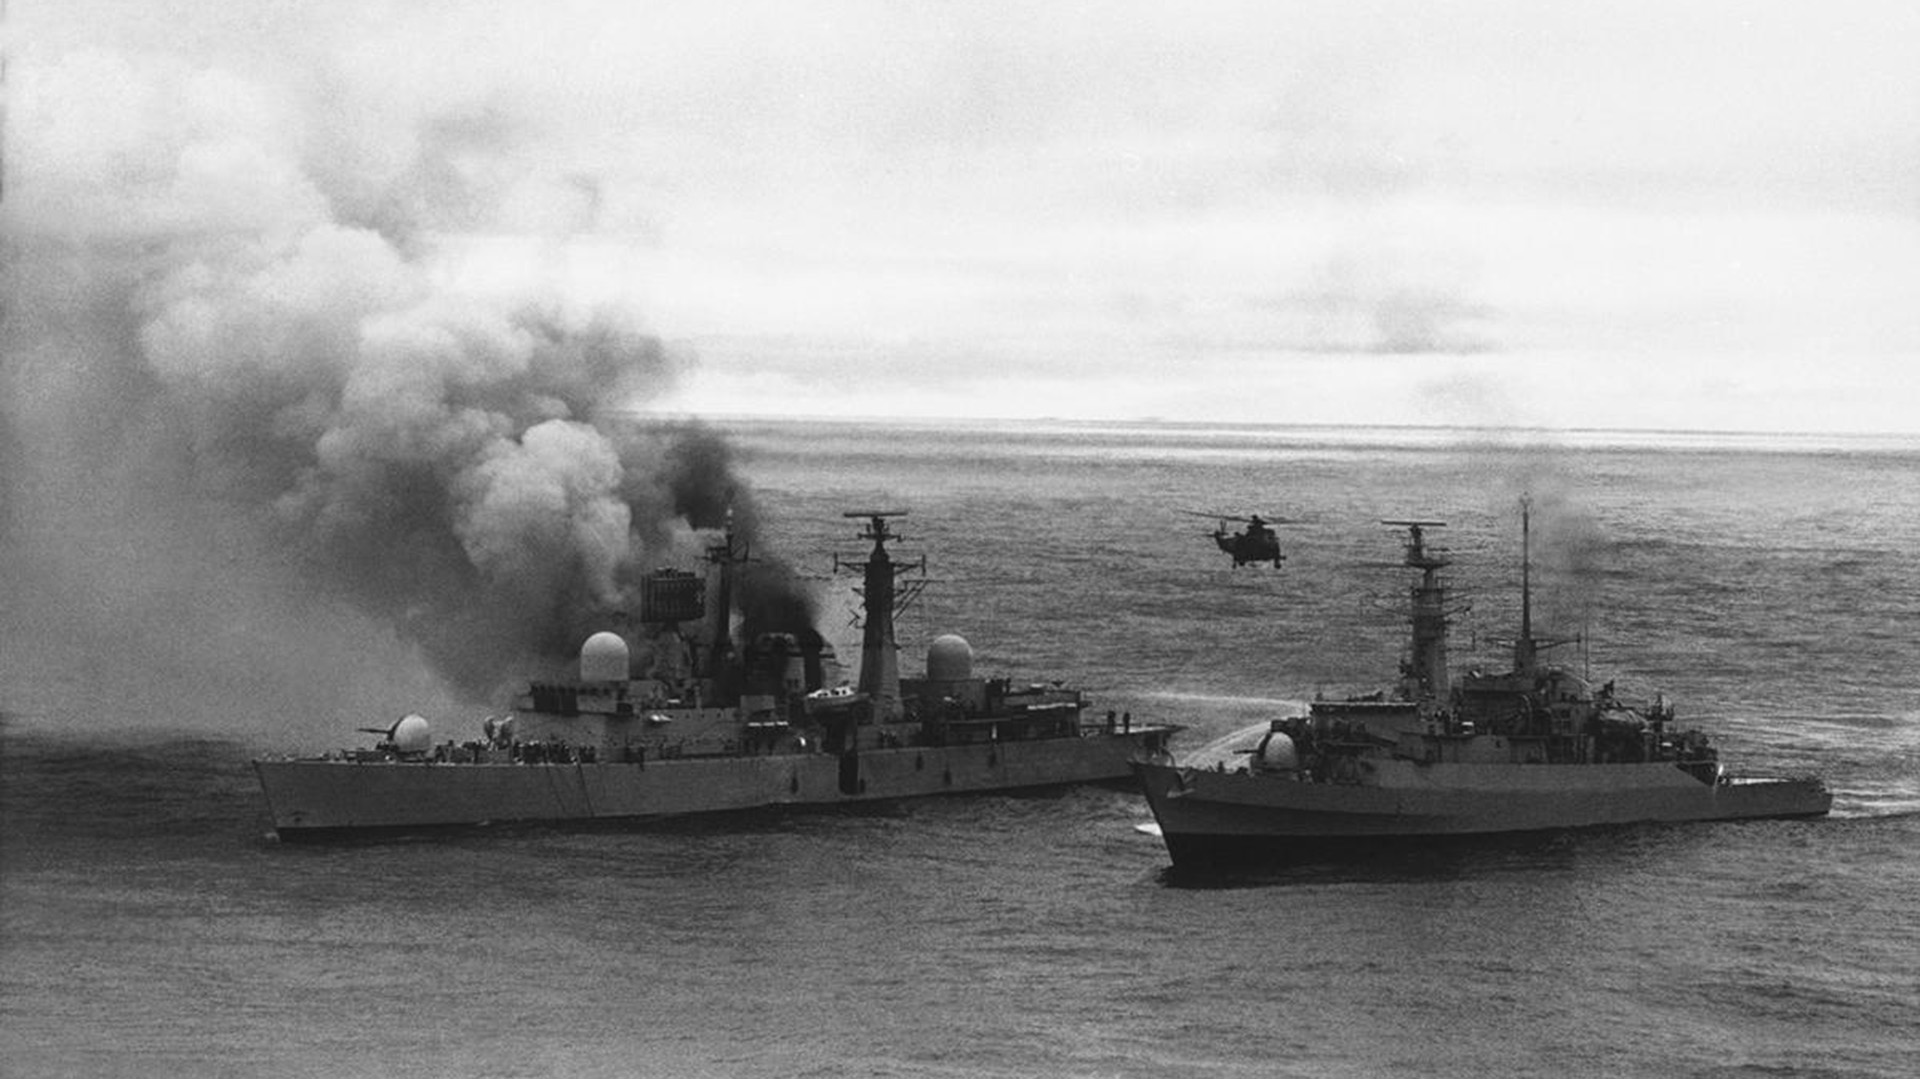 A frigate closes in on the damaged HMS Sheffield, spraying water from her hoses as a Sea King helicopter hovers over head in Falkland Islands, on May 28, 1982. Two Argentine Super Etendard strike fighters attacked the ship with missiles, starting fires that burned for days, before the Sheffield finally sank. Twenty lives were lost.  (AP)